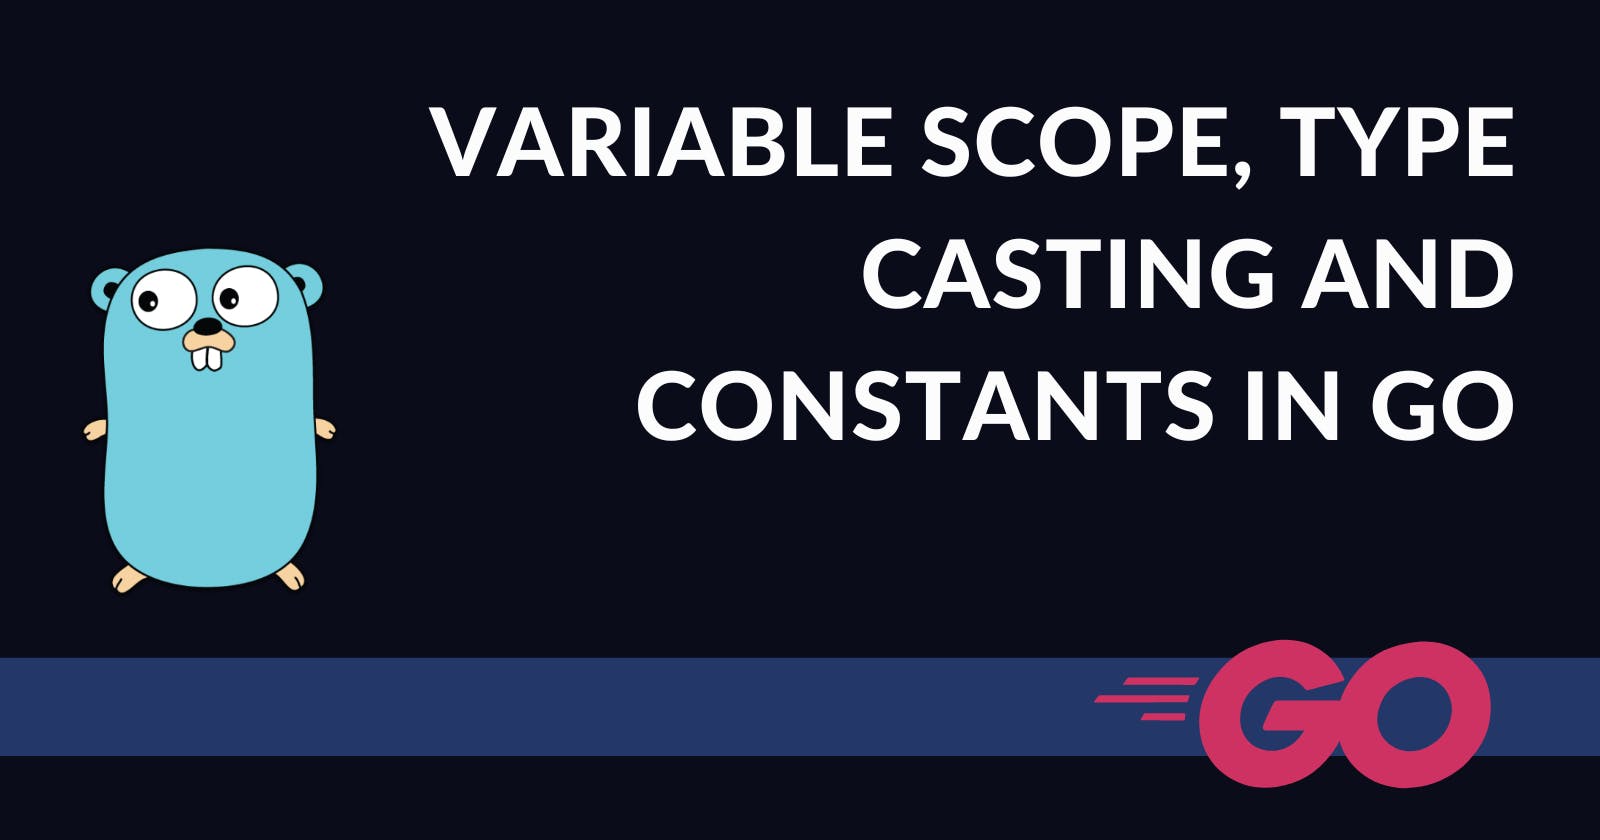 Variable Scope, Type Casting and Constants in Go (Blog 6 of the Go Series)